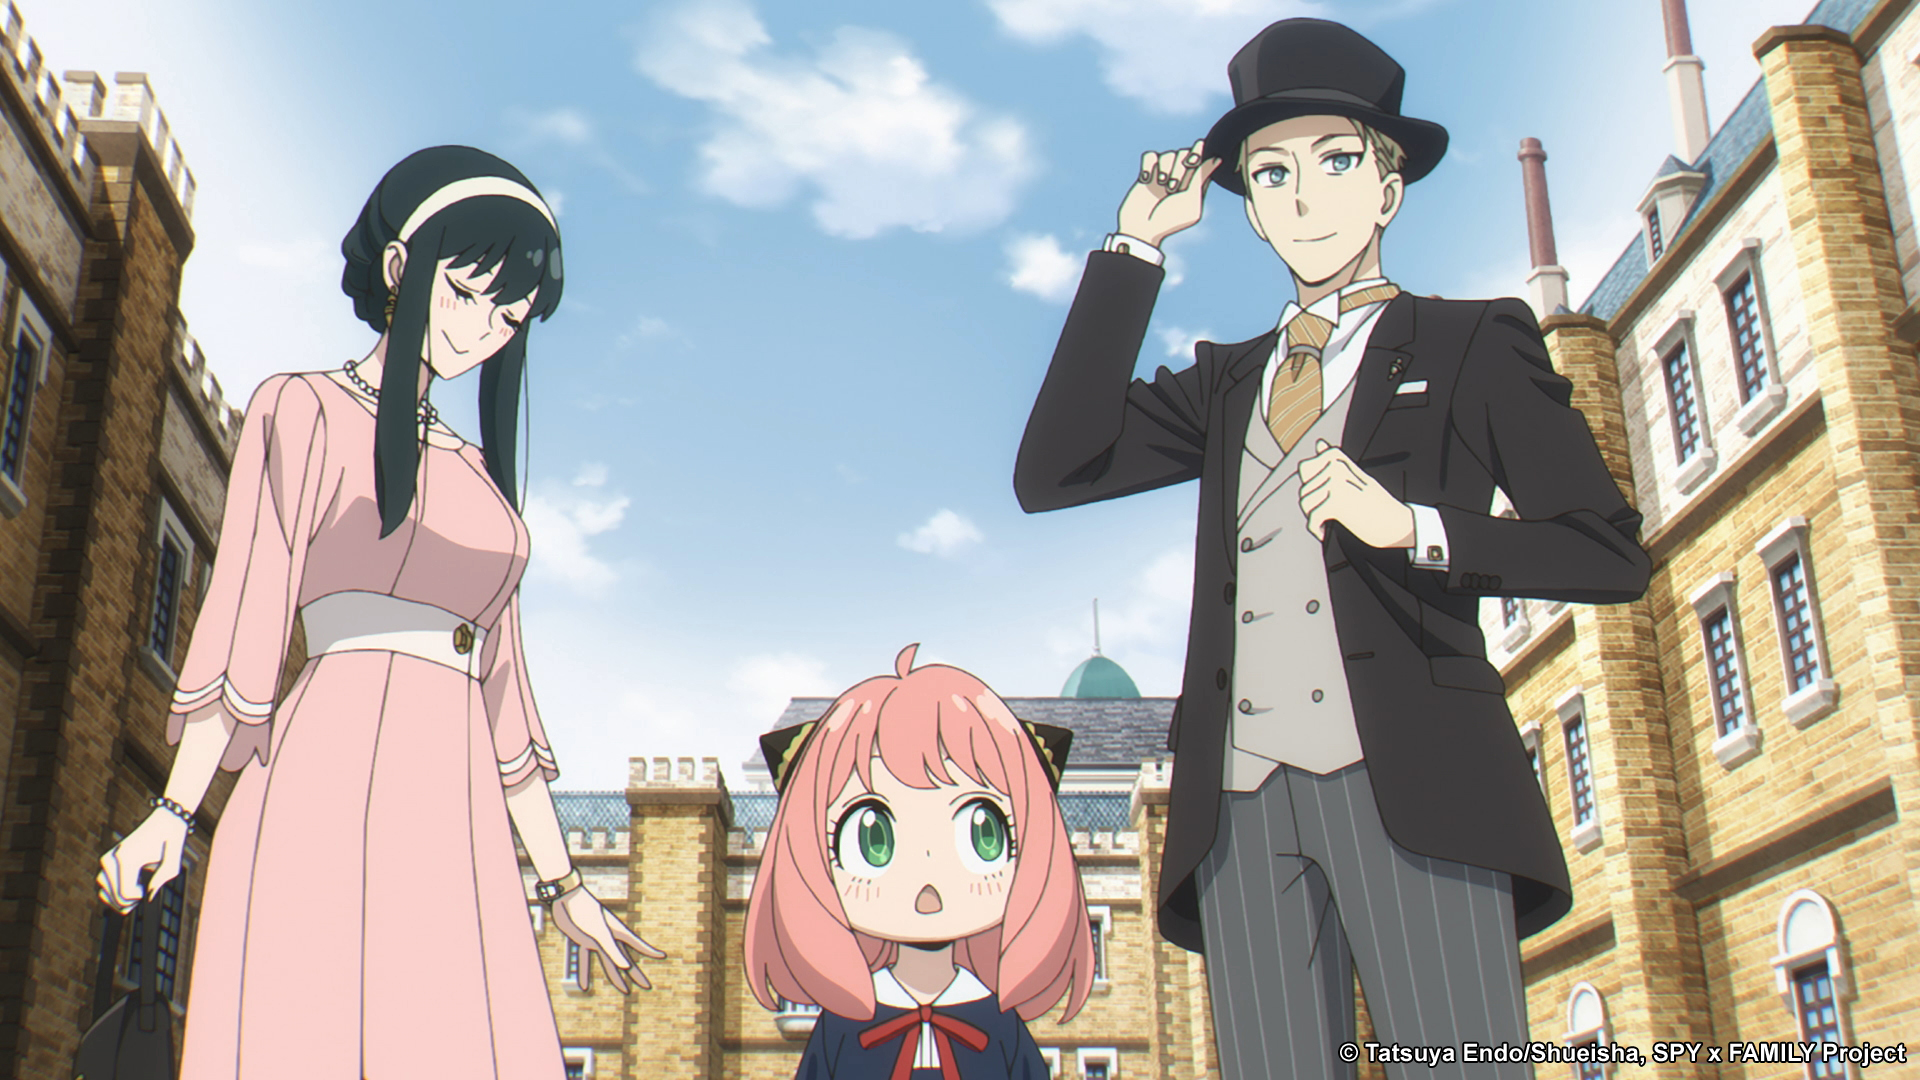 Yor, Anya, and Loid in 'Spy x Family' Episode 4. They're standing in front of Eden College and wearing fancy clothes.